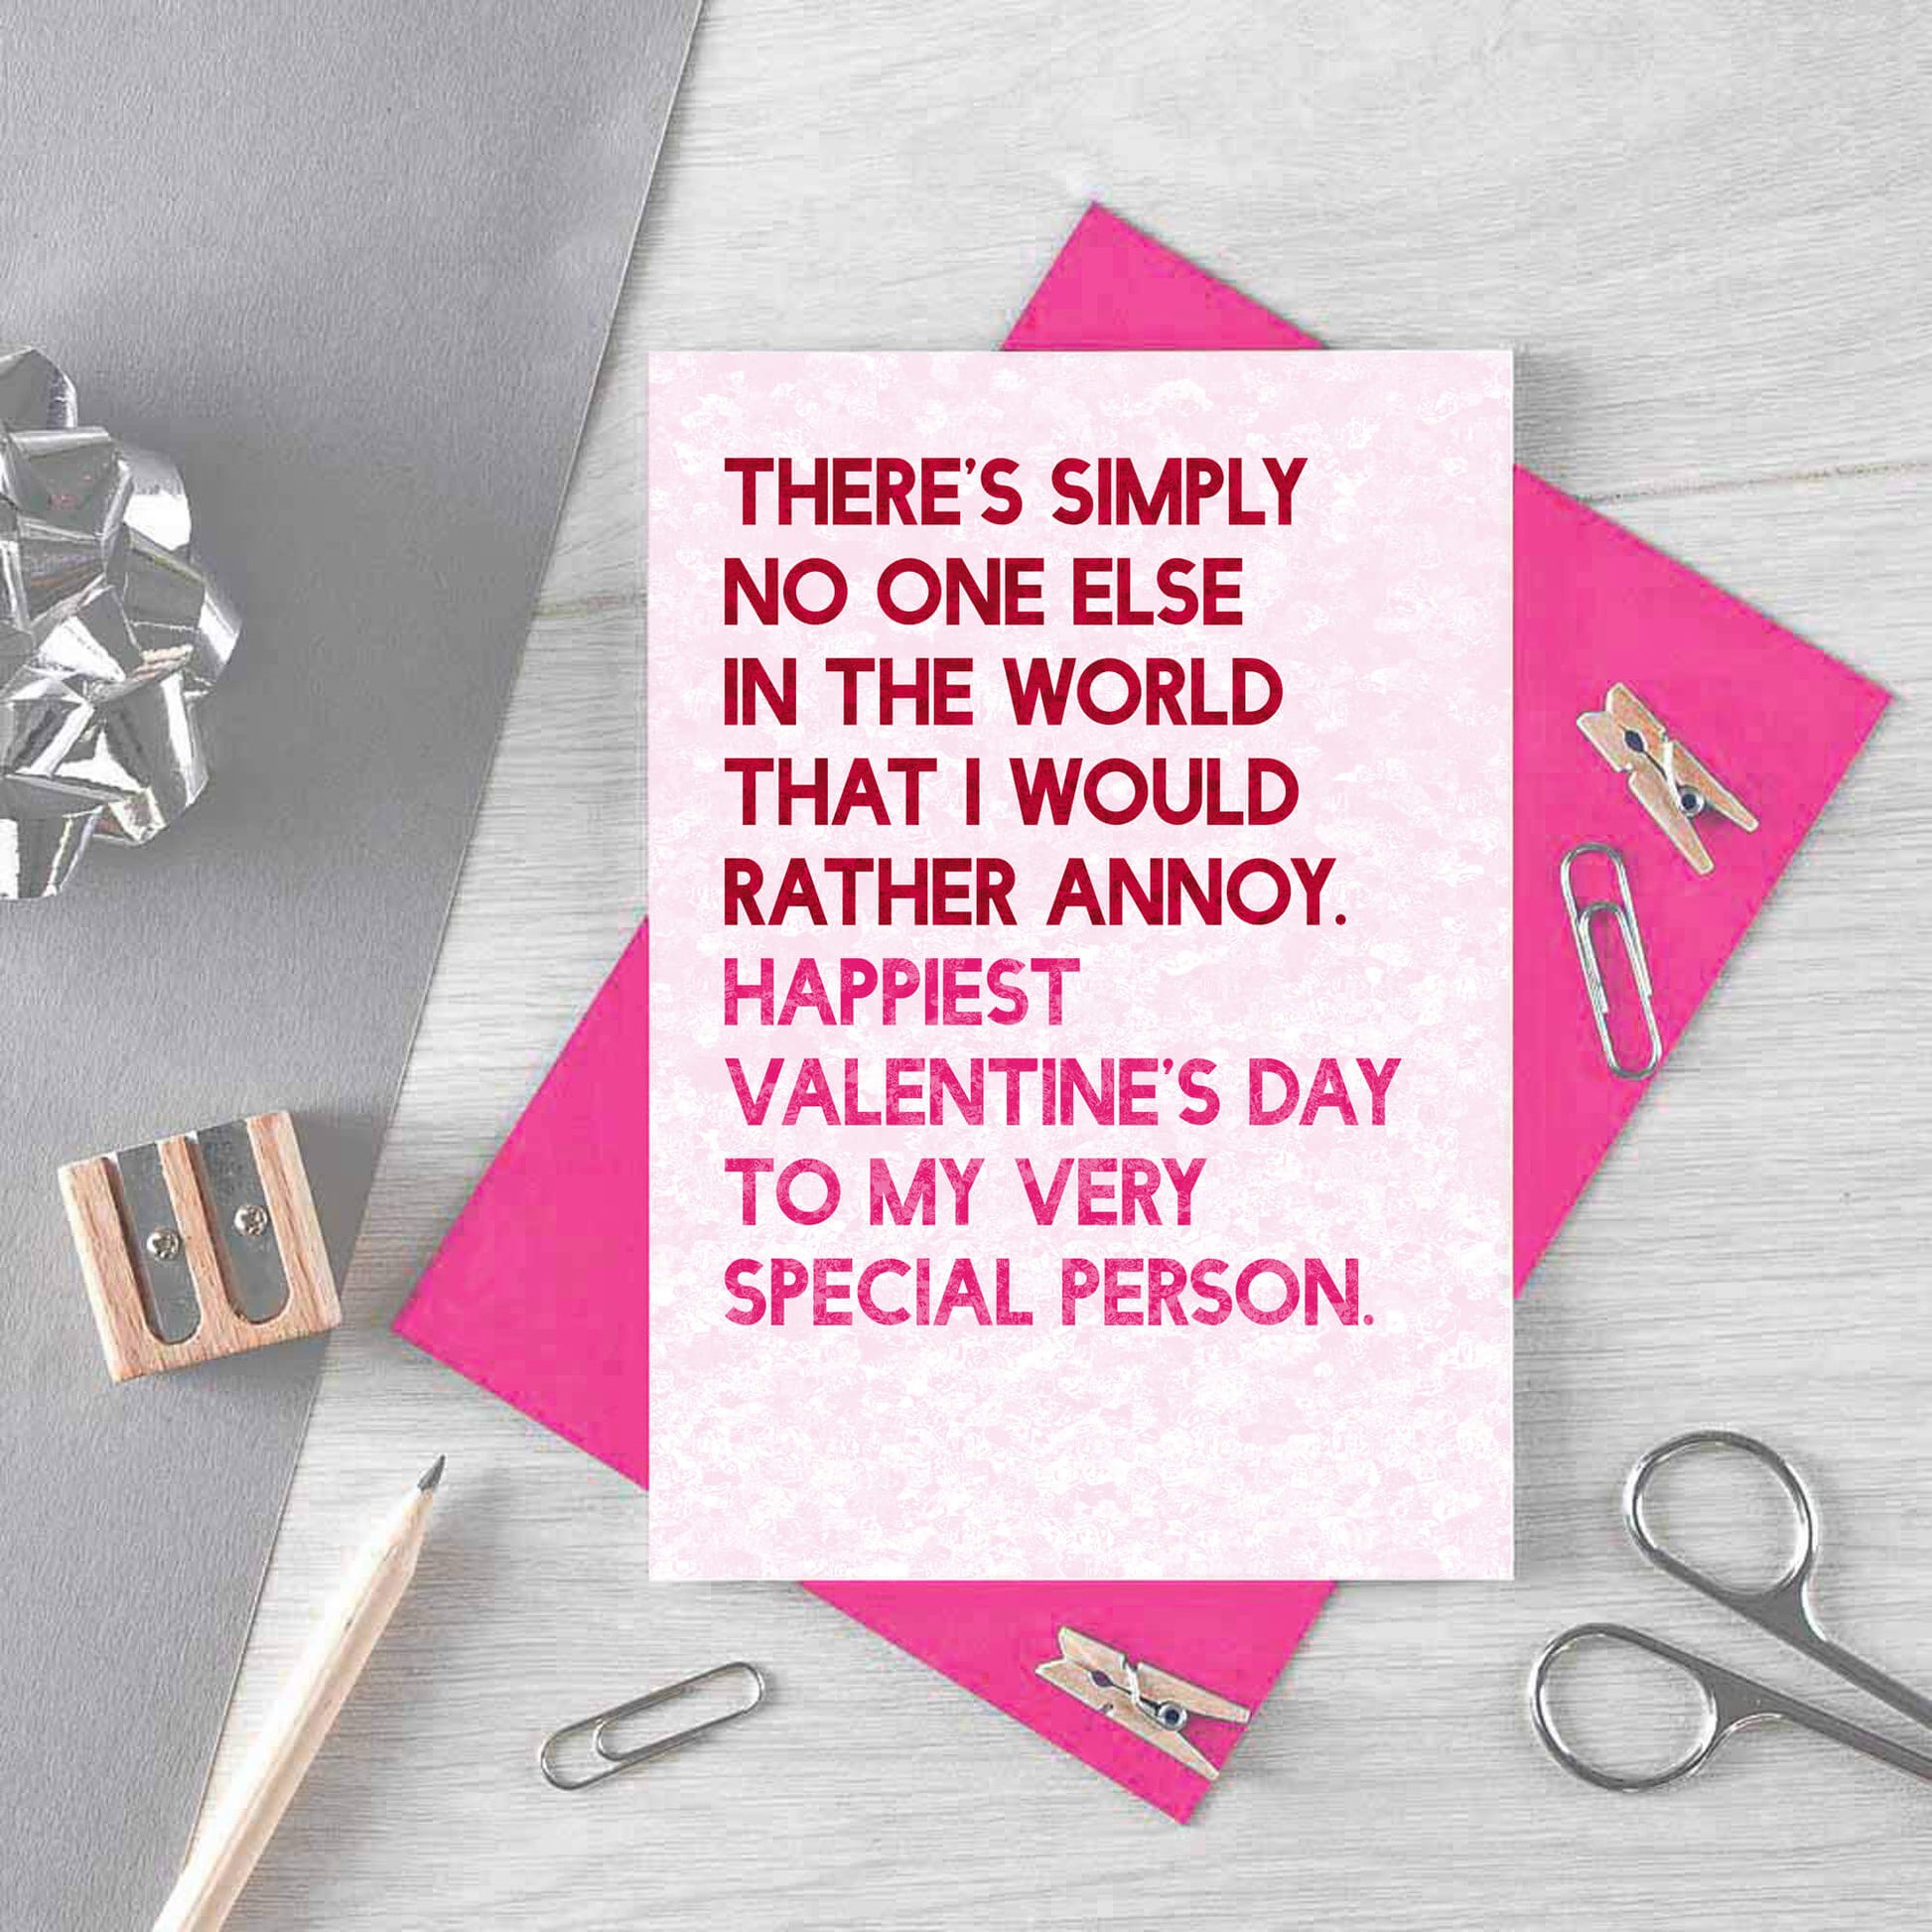 Valentine Card by SixElevenCreations. Reads There's simply no one else in the world that I would rather annoy. Happiest Valentine's Day to my very special person. Product Code SEV0046A6